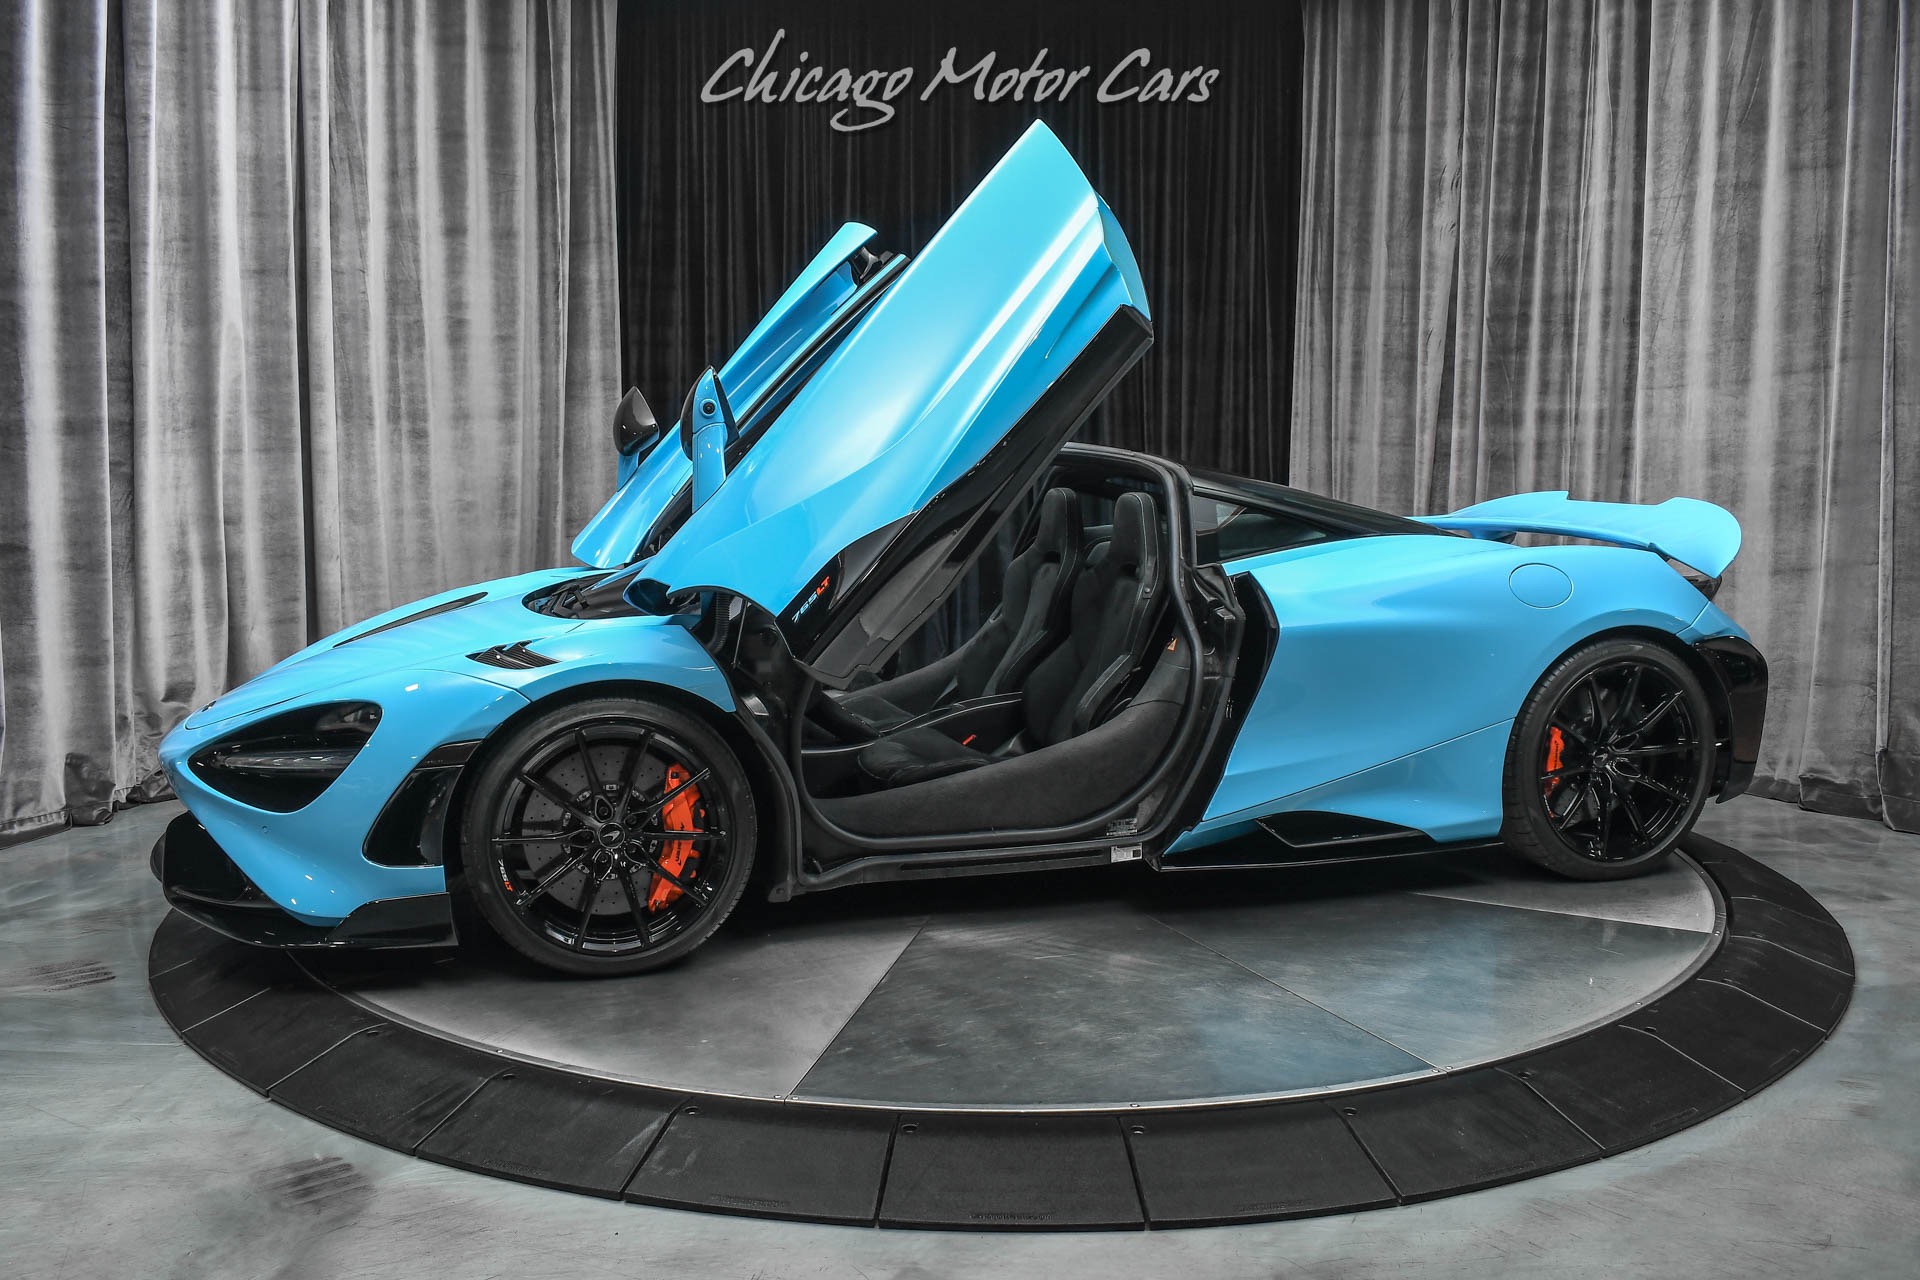 Used-2021-McLaren-765LT-Coupe-ONLY-2K-Miles-Curacao-Blue-MSO-Black-Pack-HOT-Spec-LOADED